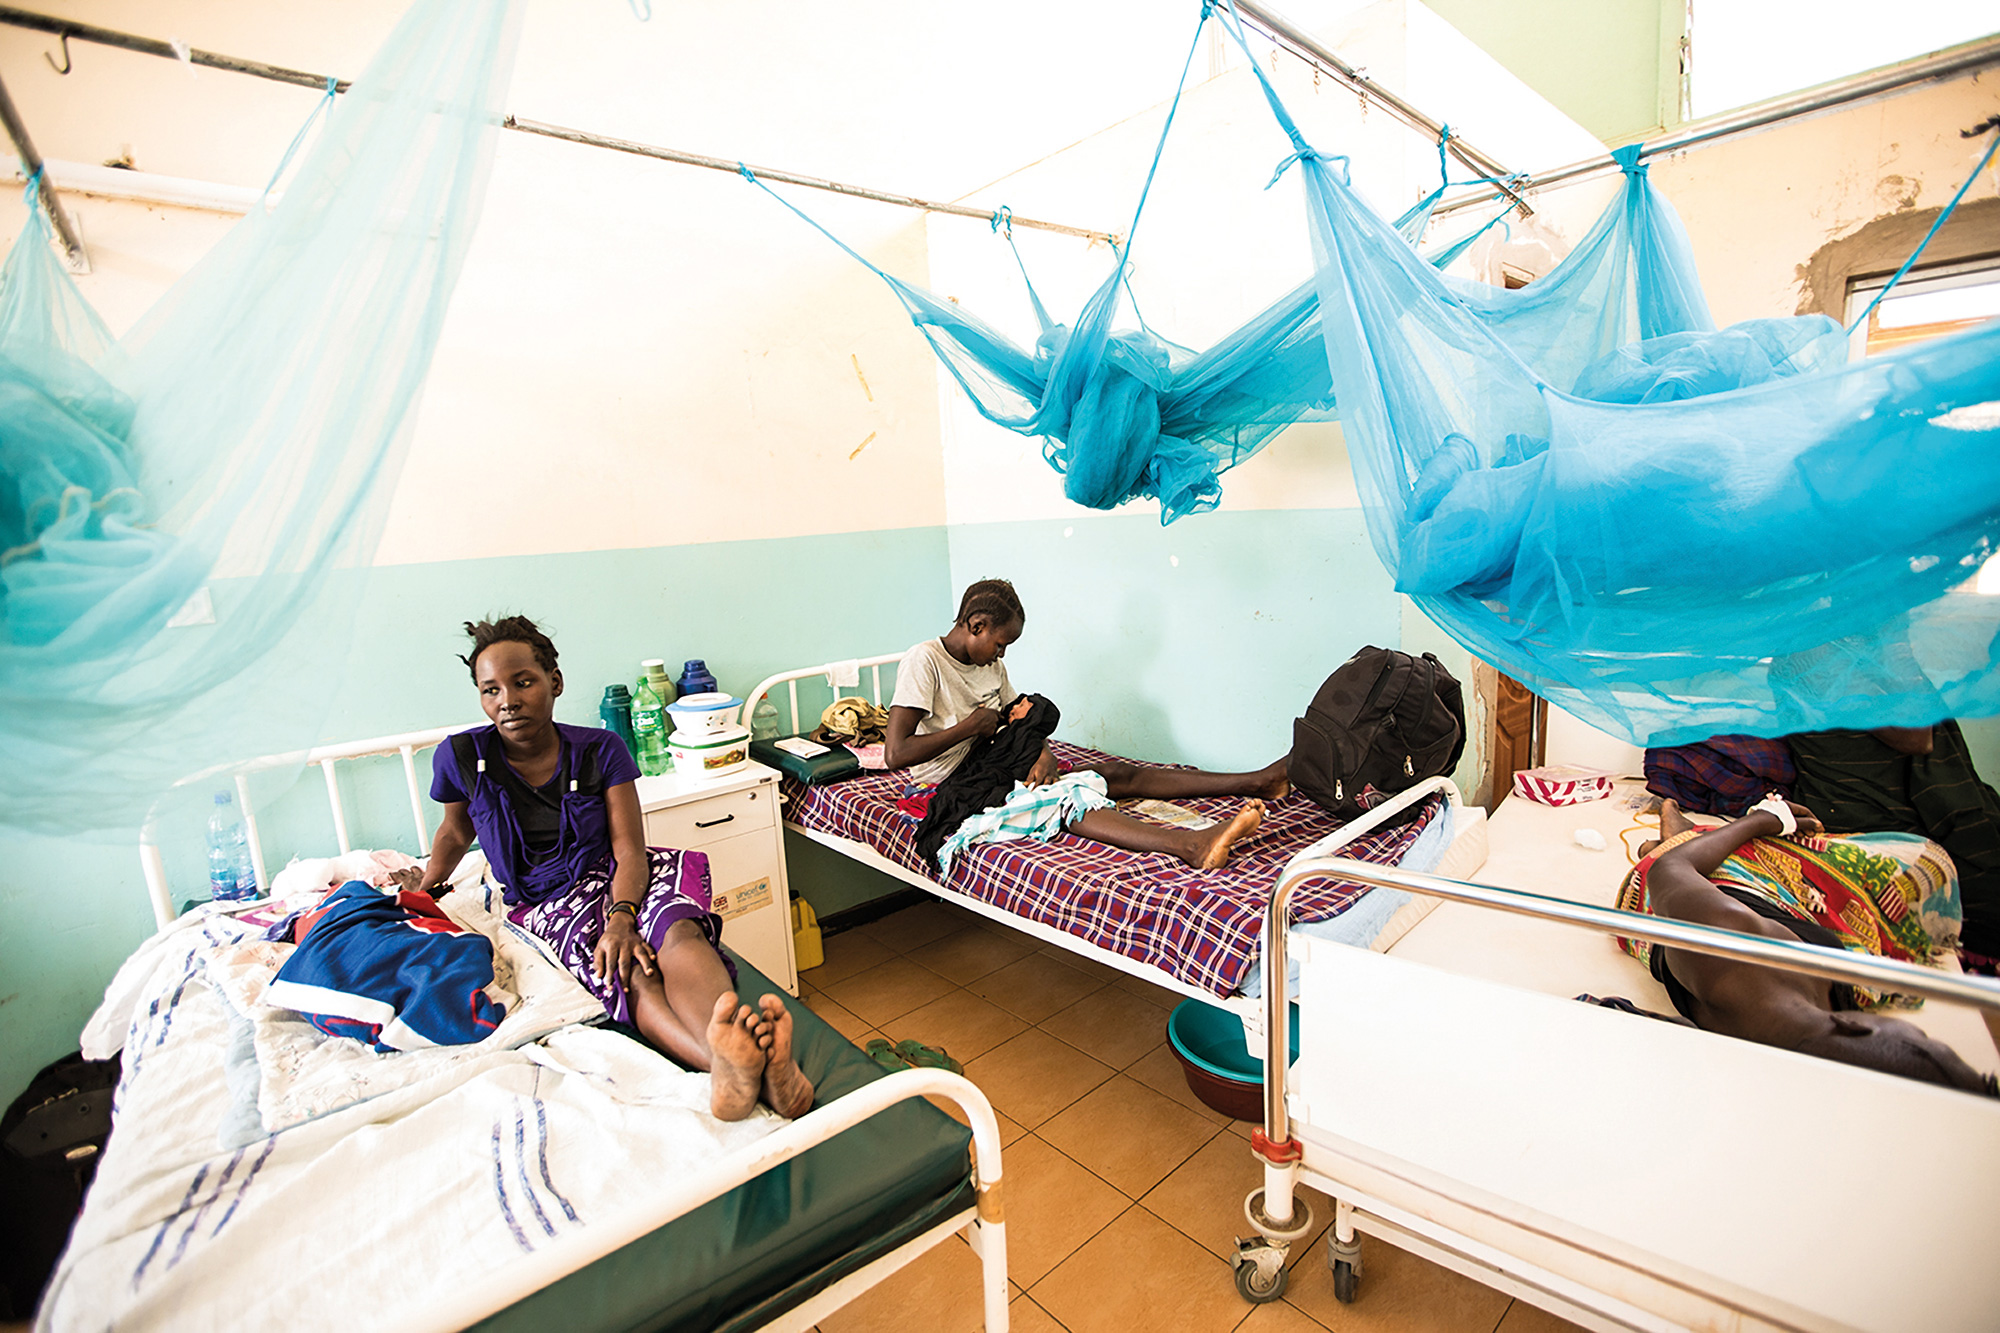 UNOPS works with partners to reduce maternal mortality and strengthen healthcare services in Kenya. Photo credit: © UNOPS / John Rae 